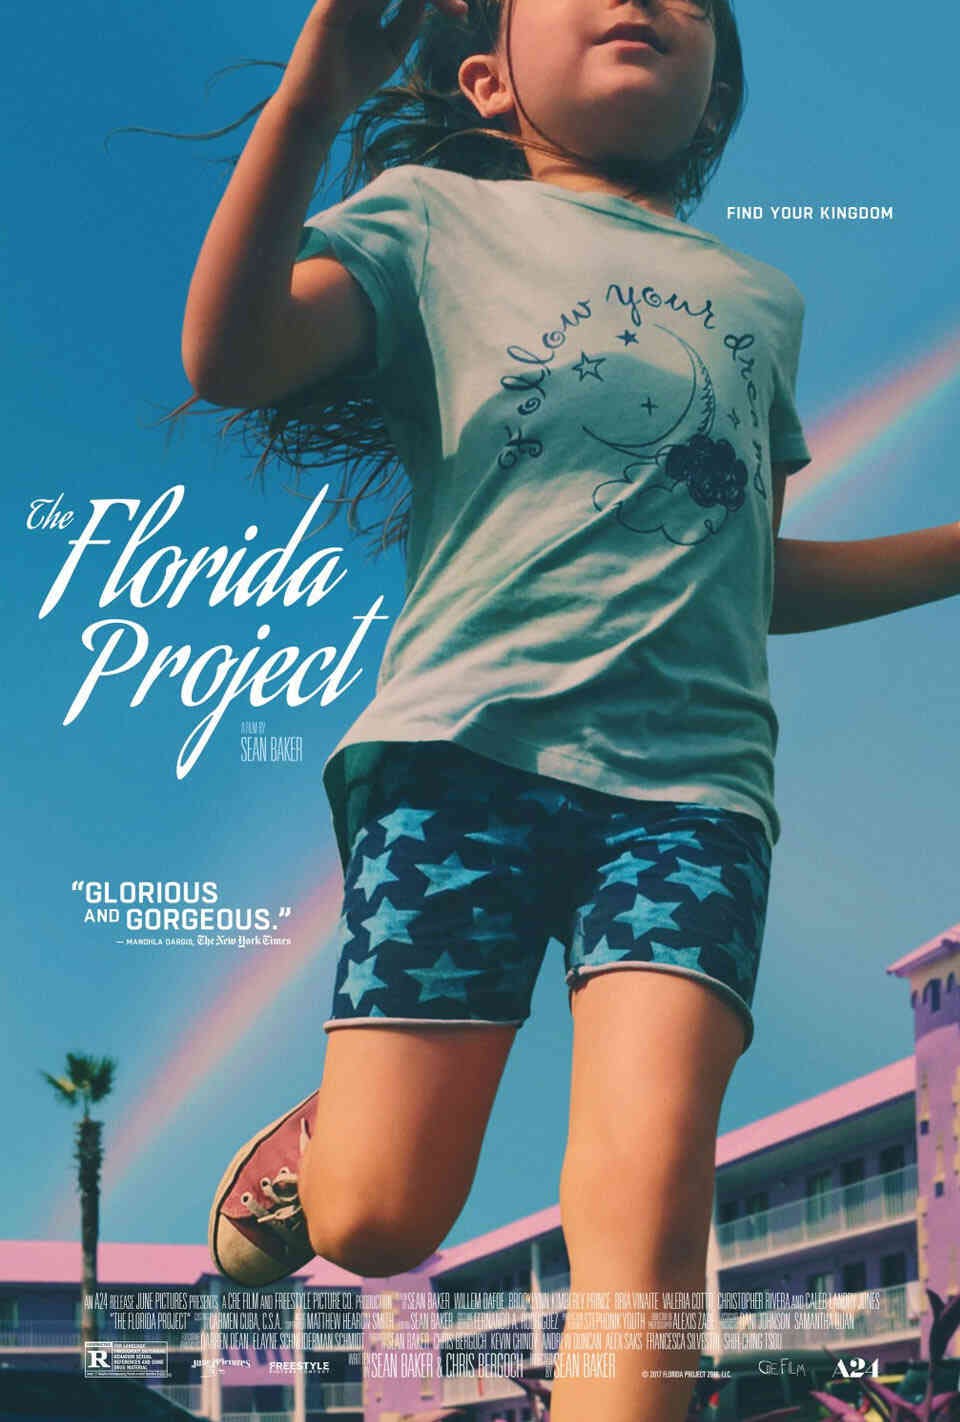 Read The Florida Project screenplay.